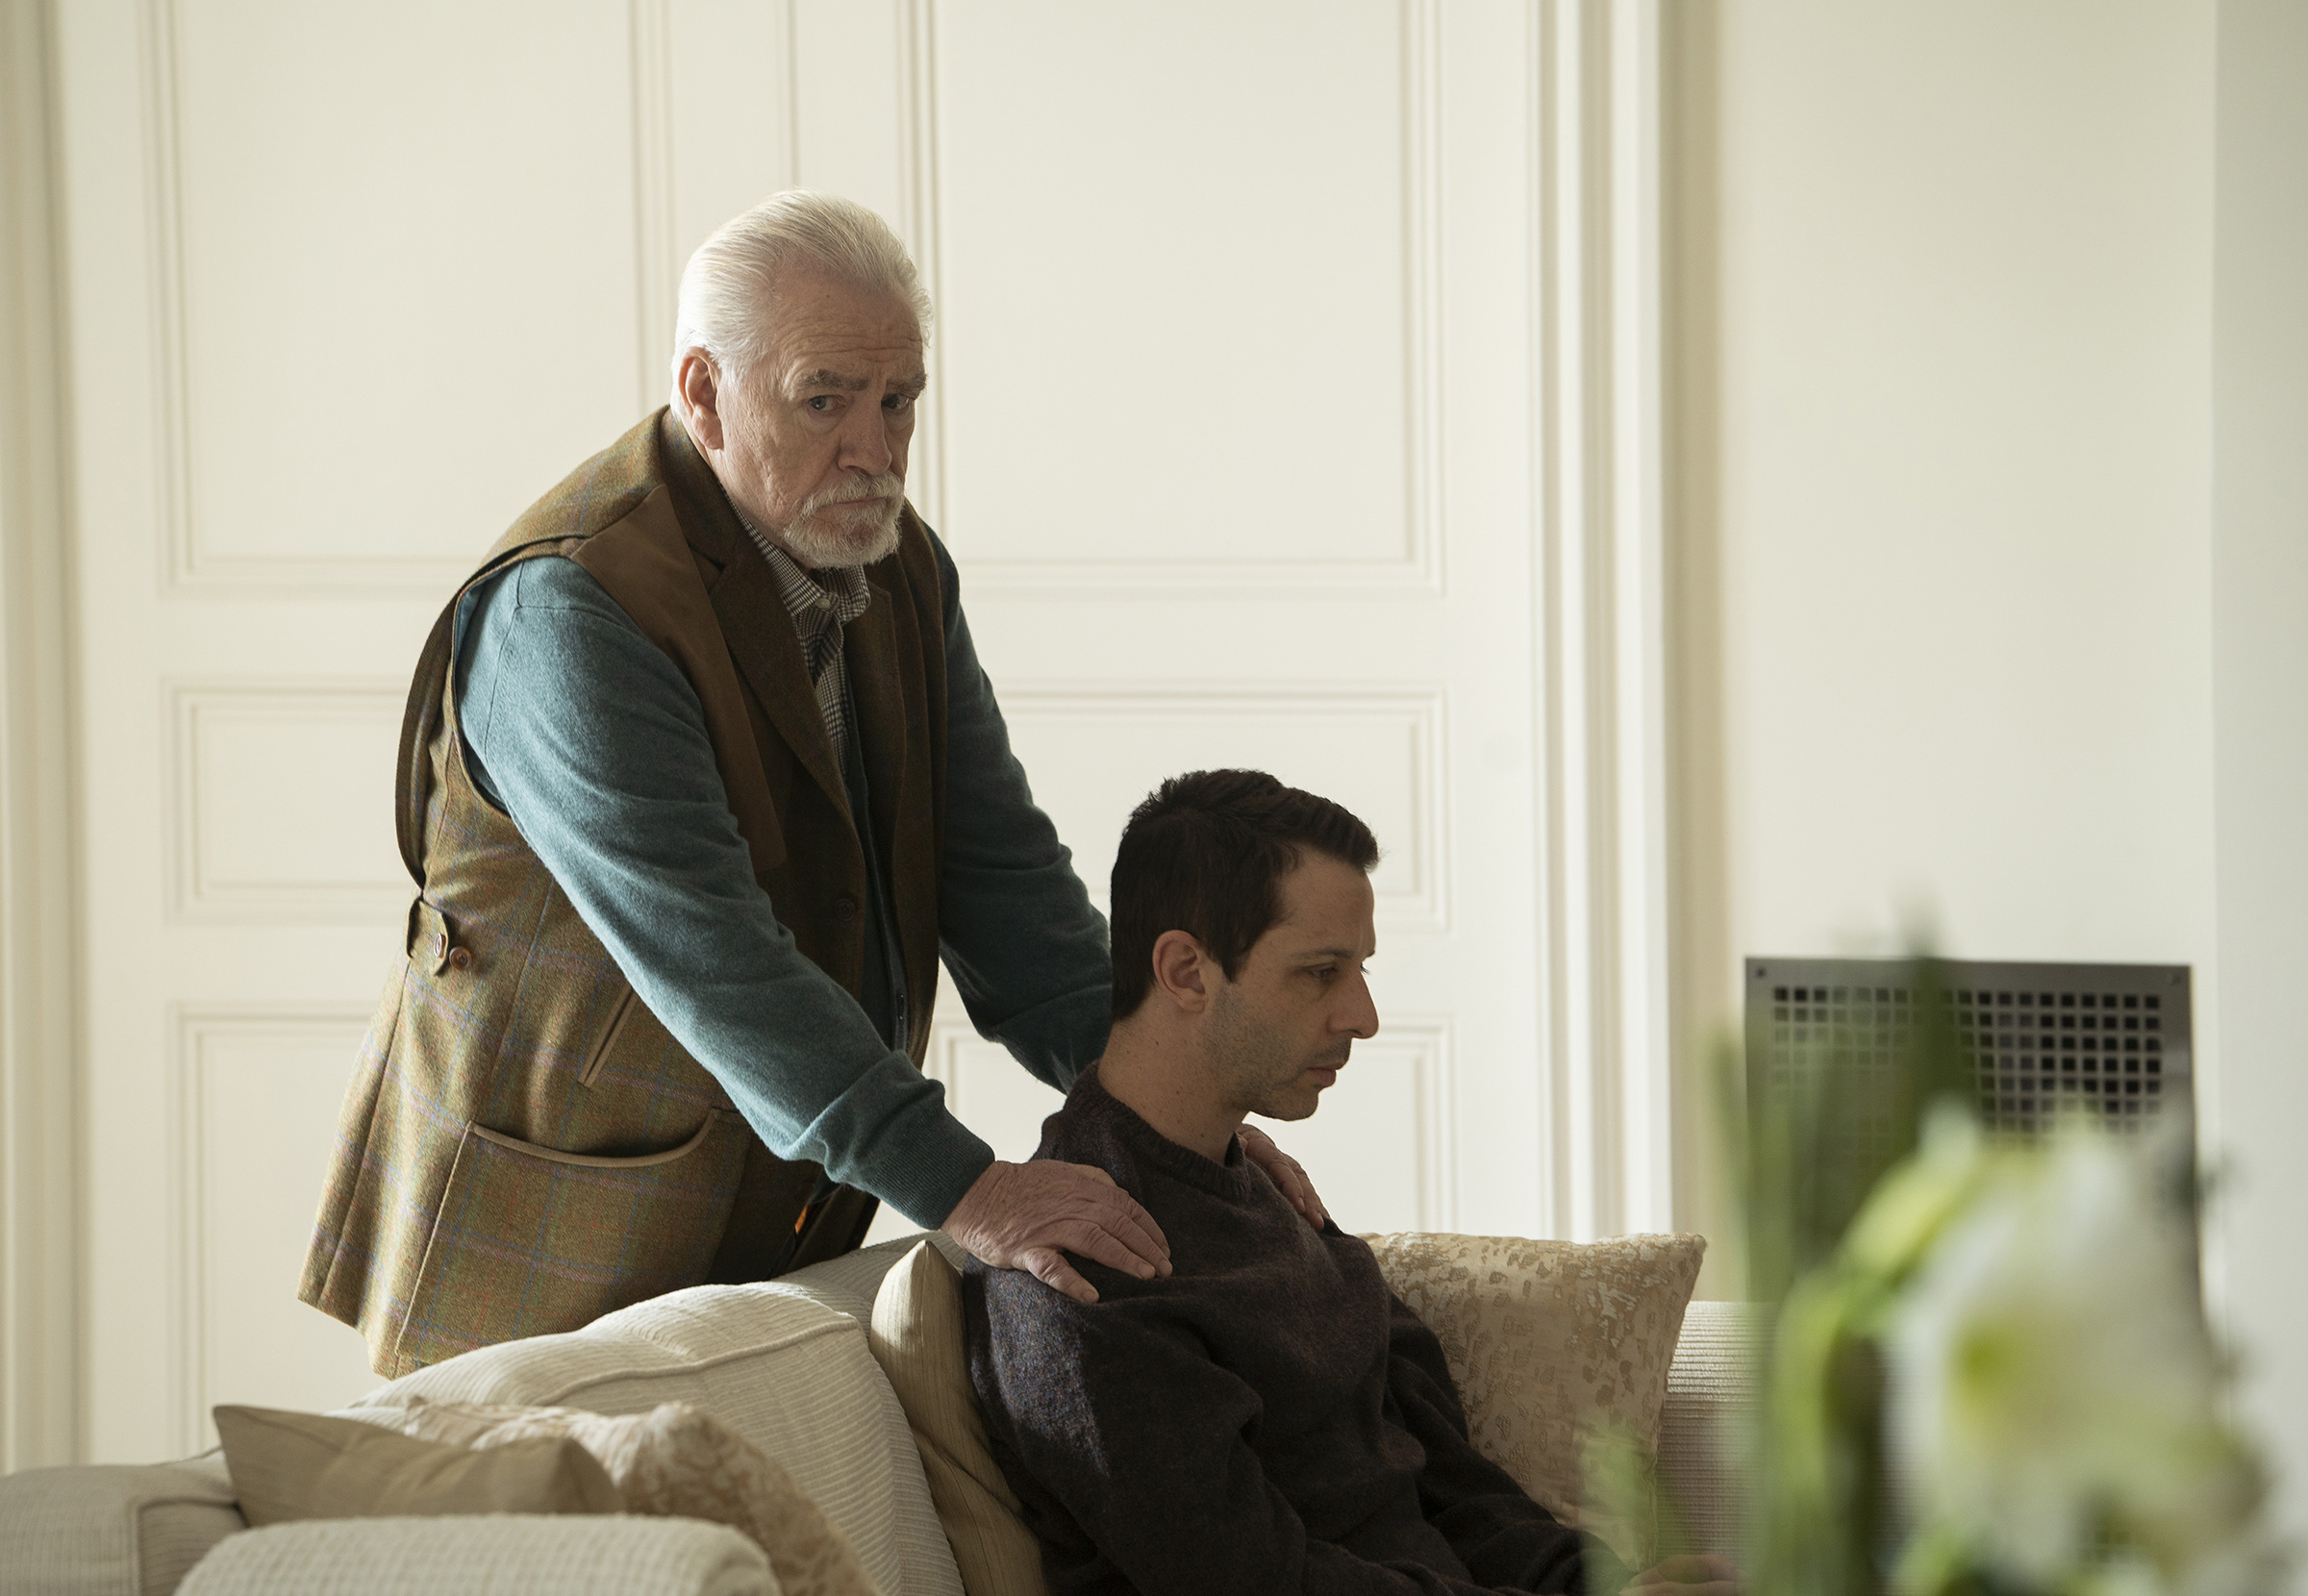 a melancholy scene on Succession: Kendall sits on a couch while his father, Logan, comforts him by putting his hands on Kendall’s shoulders